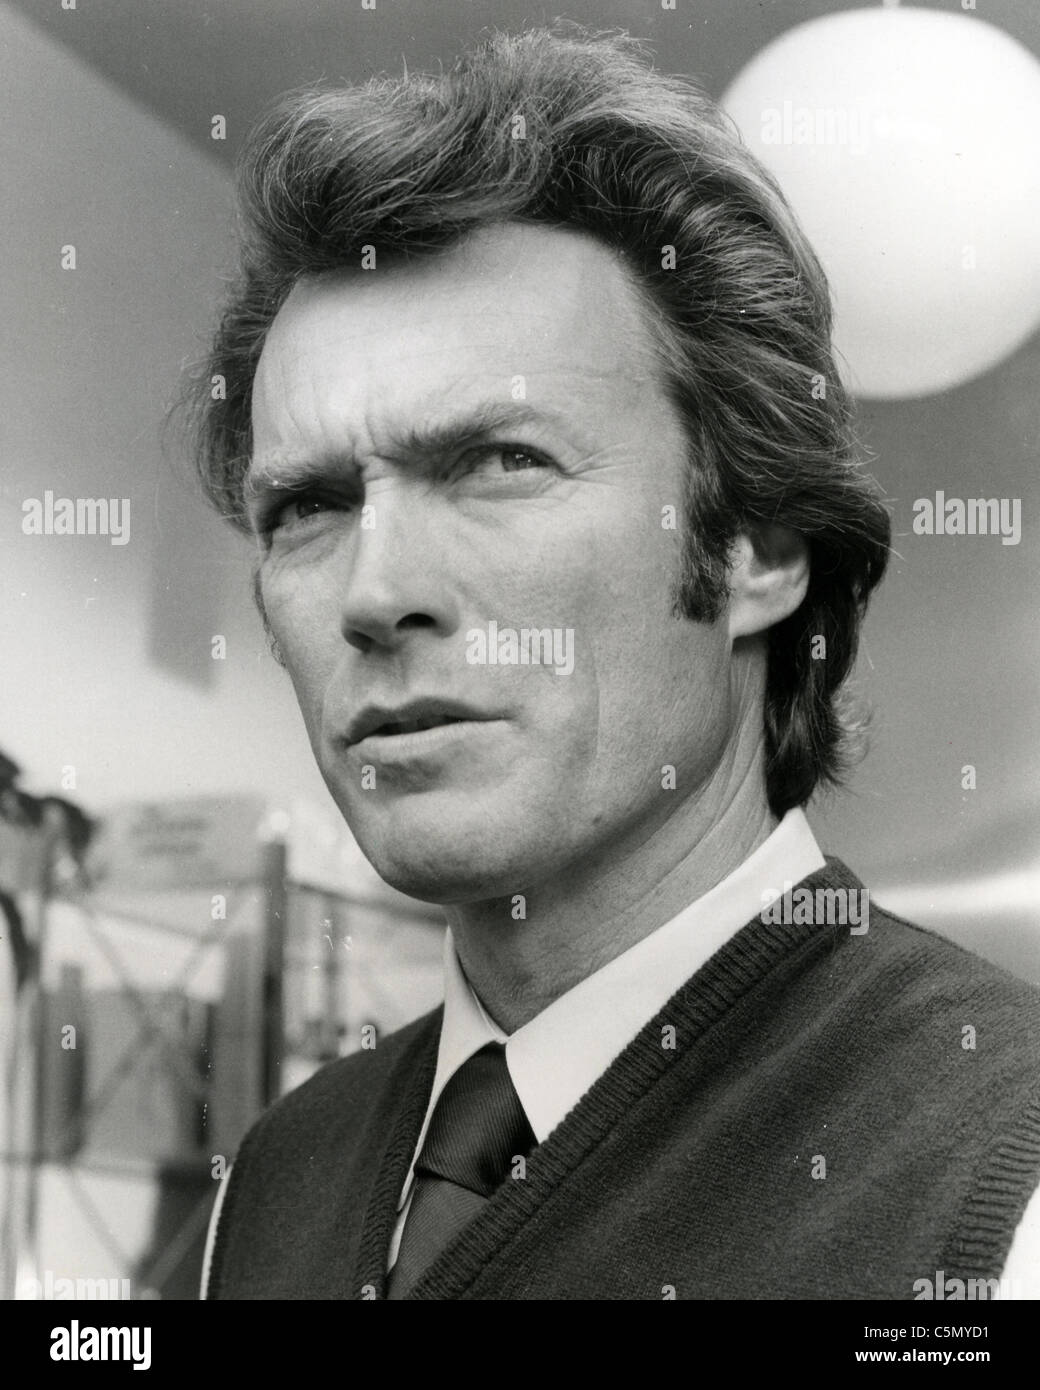 clint-eastwood-us-tv-and-film-actor-about-1972-C5MYD1.jpg